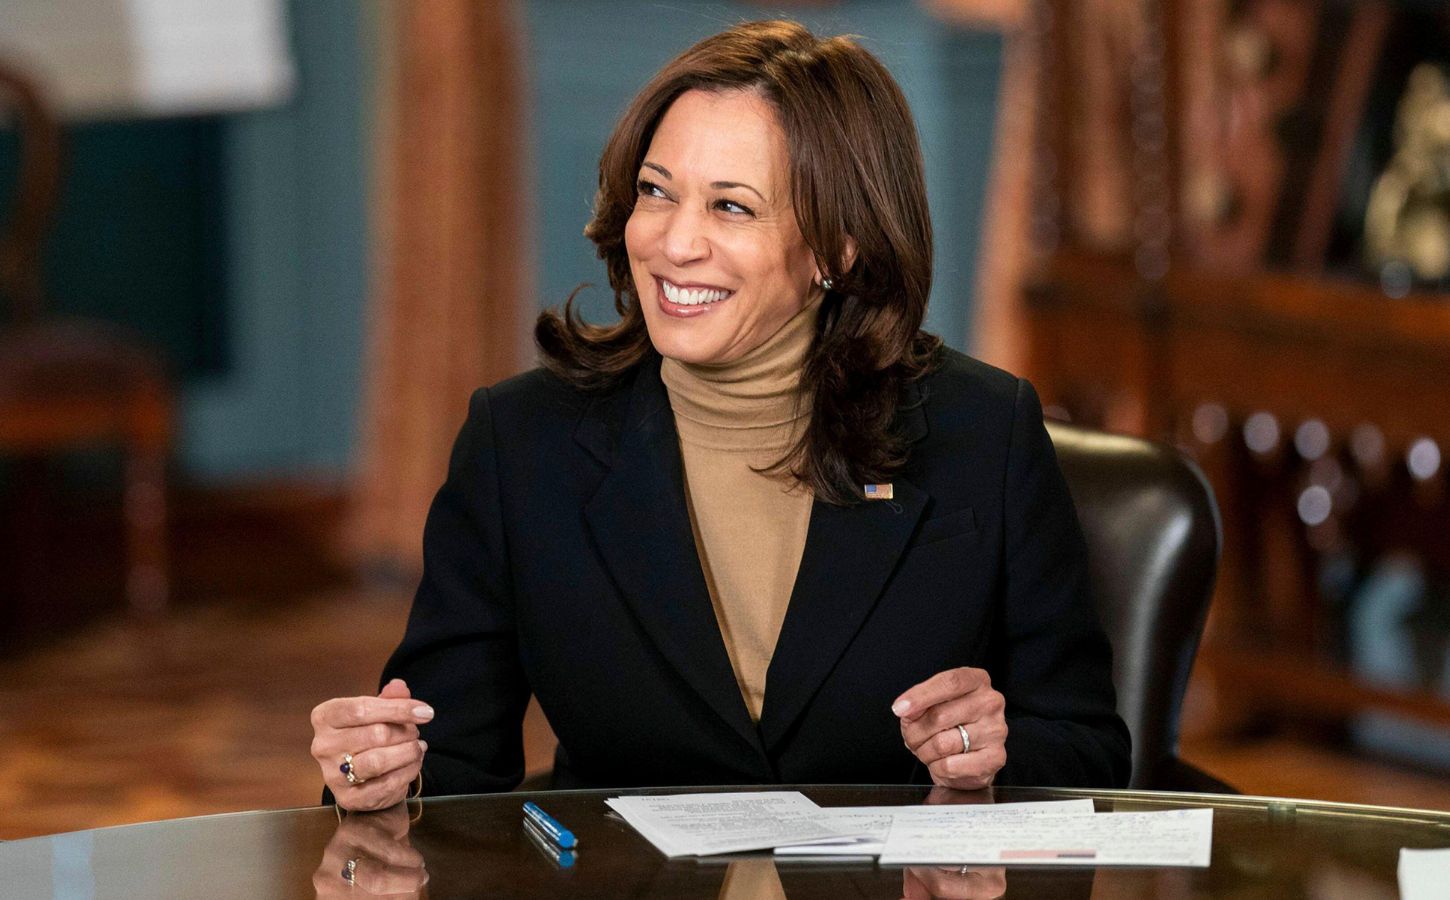 Photo shows Kamala Harris seated at a wooden table and smiling off-camera